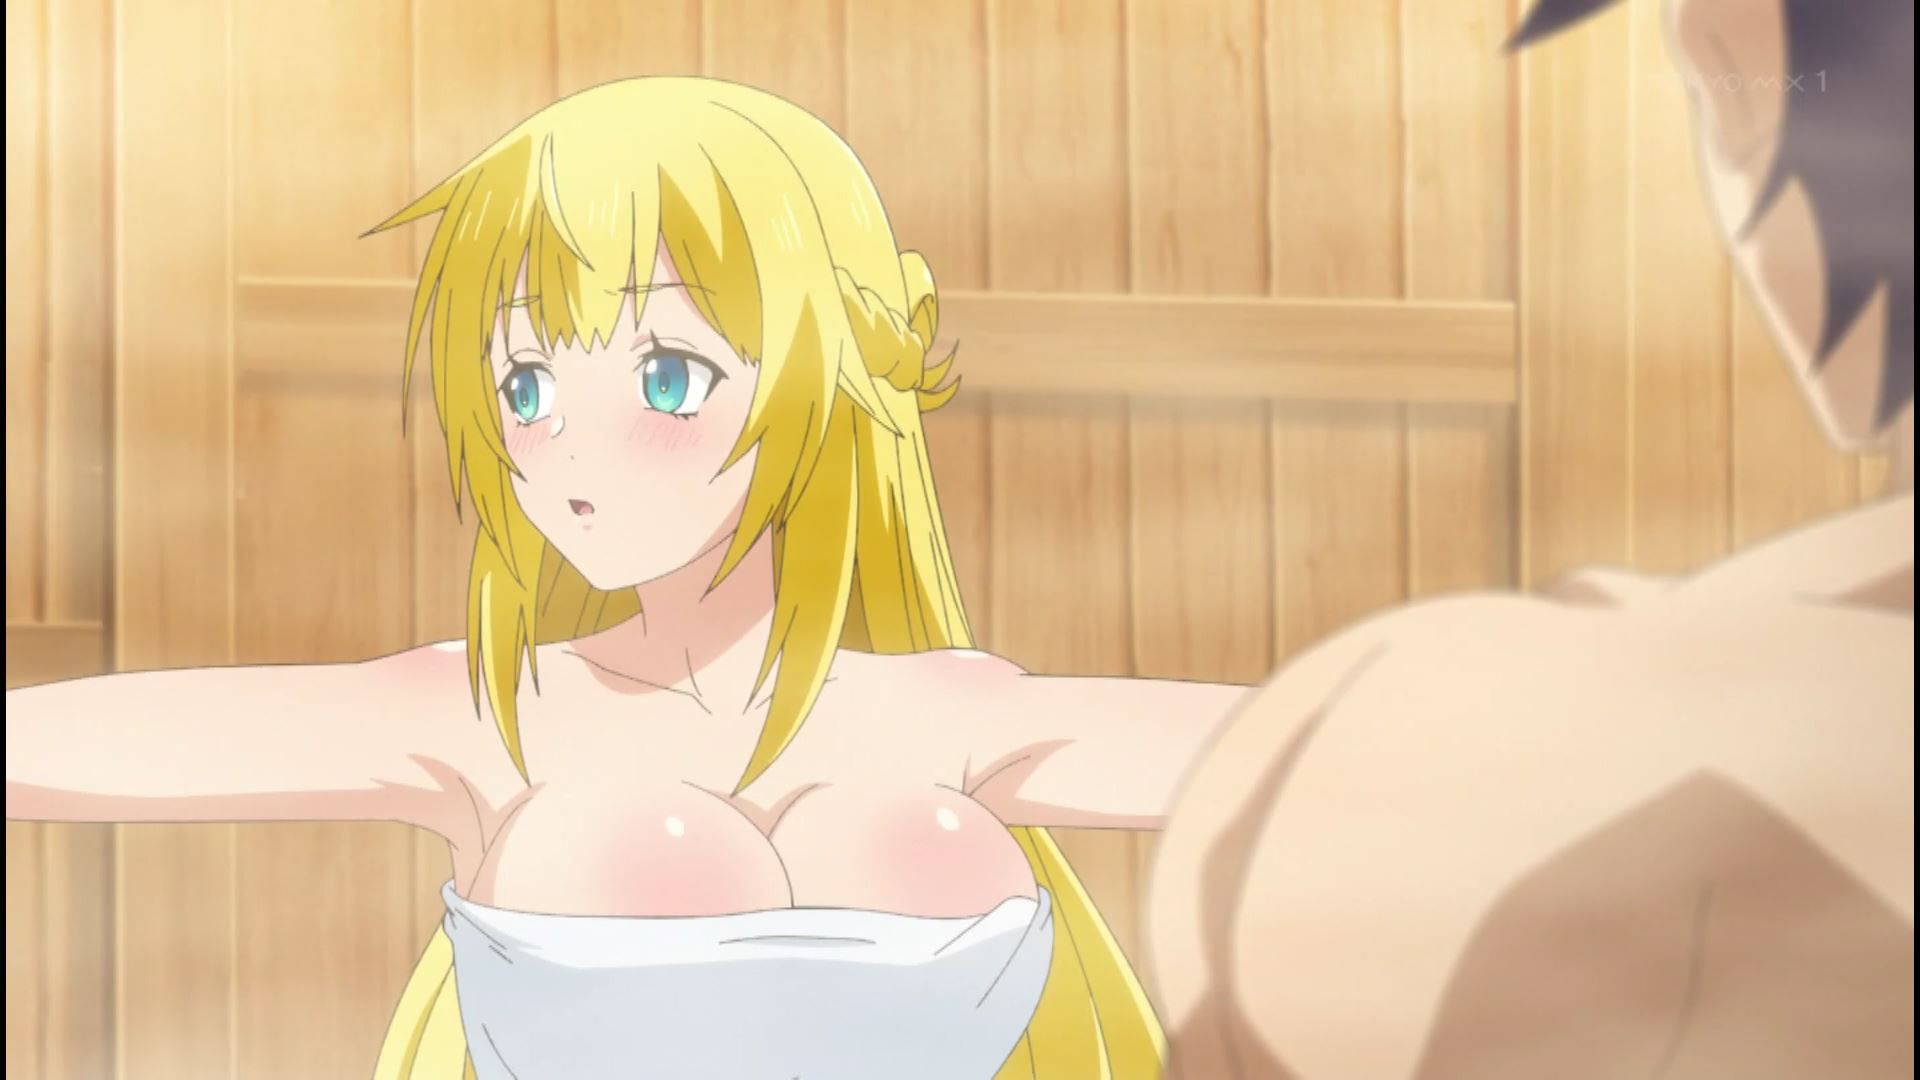 In episode 4 of the anime "True Companion", there is an erotic scene where you enter the sauna naked with an erotic boob girl! 15